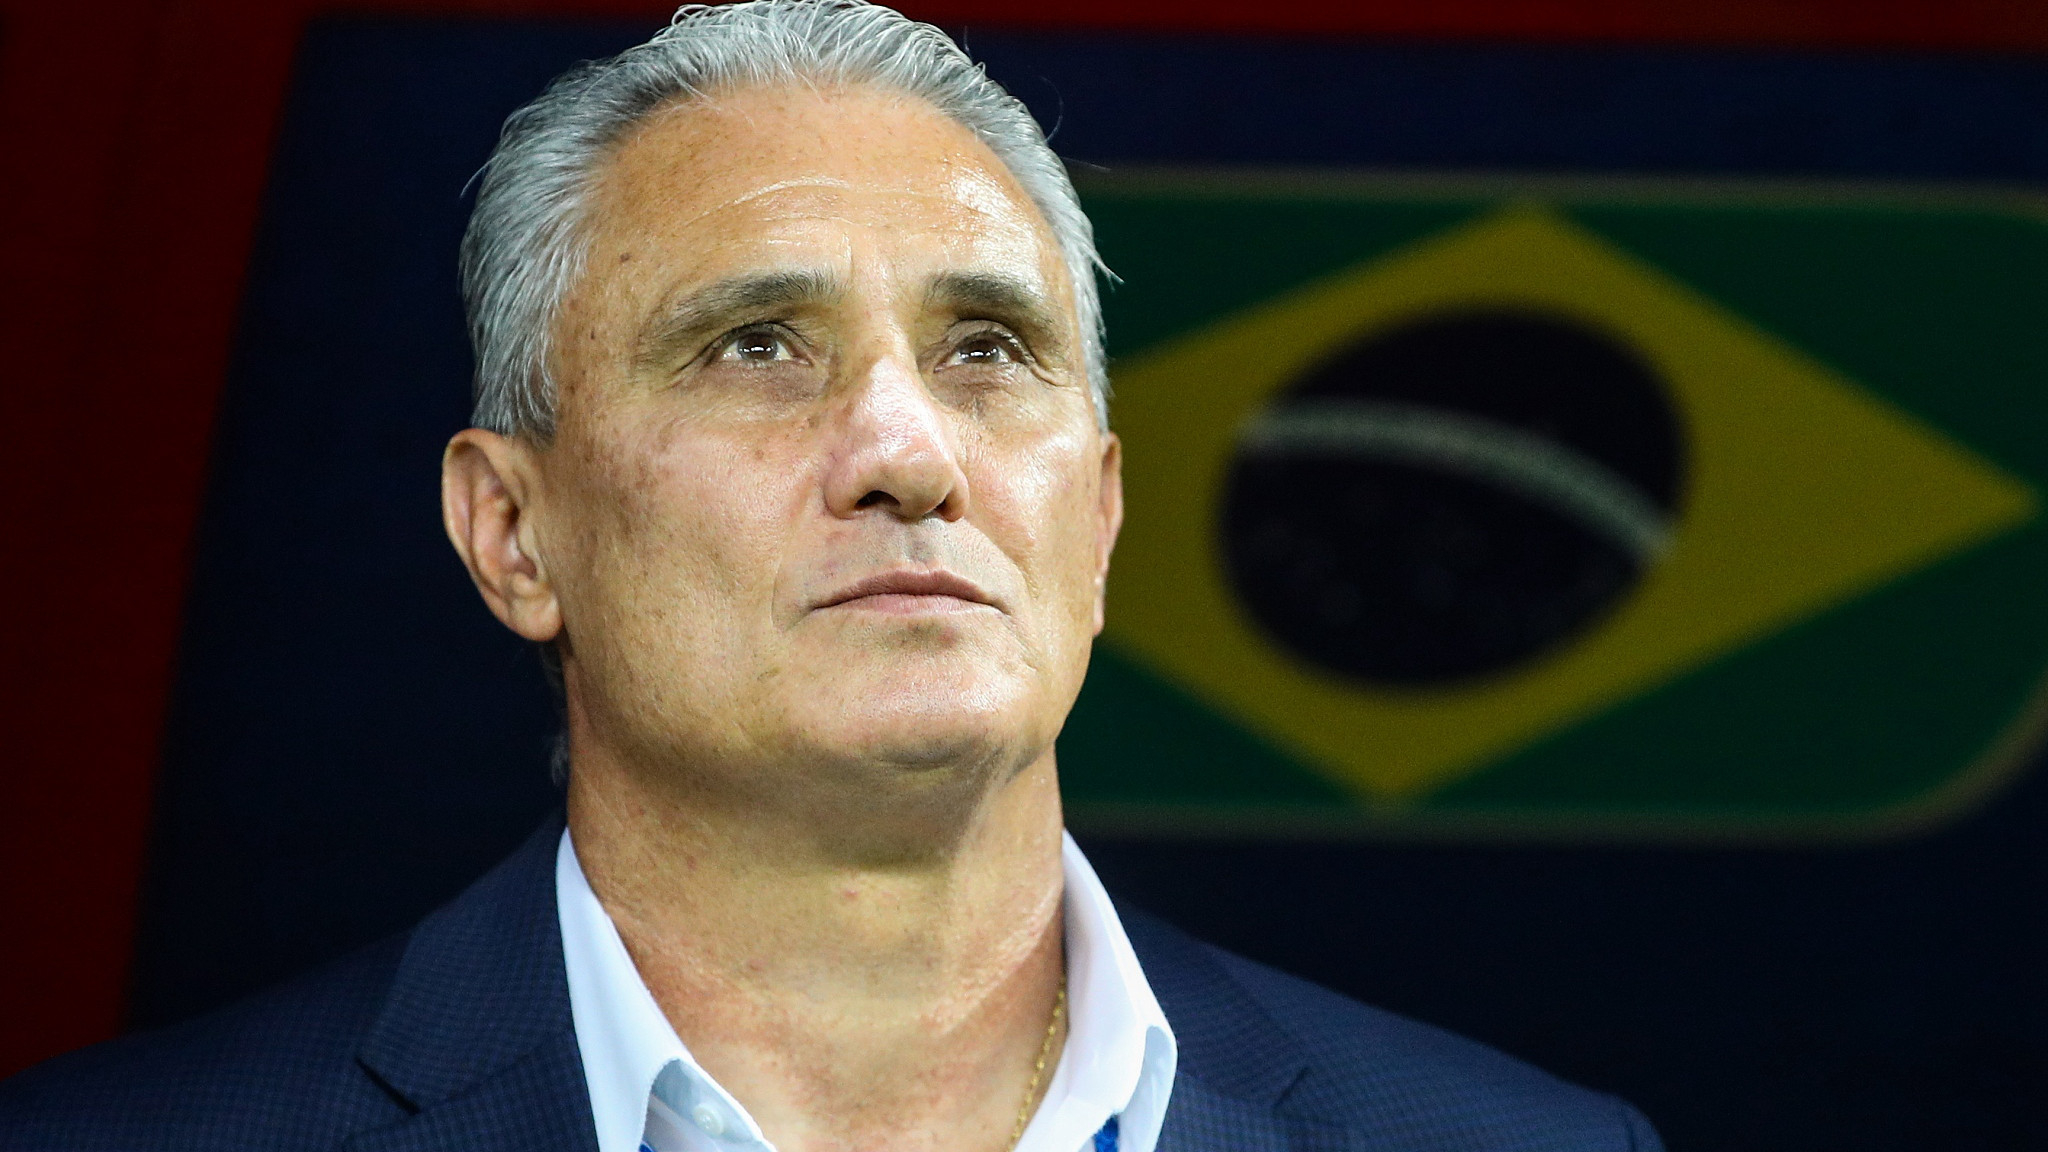 Brazil coach Tite signs new four-year contract despite World Cup flop - CGTN